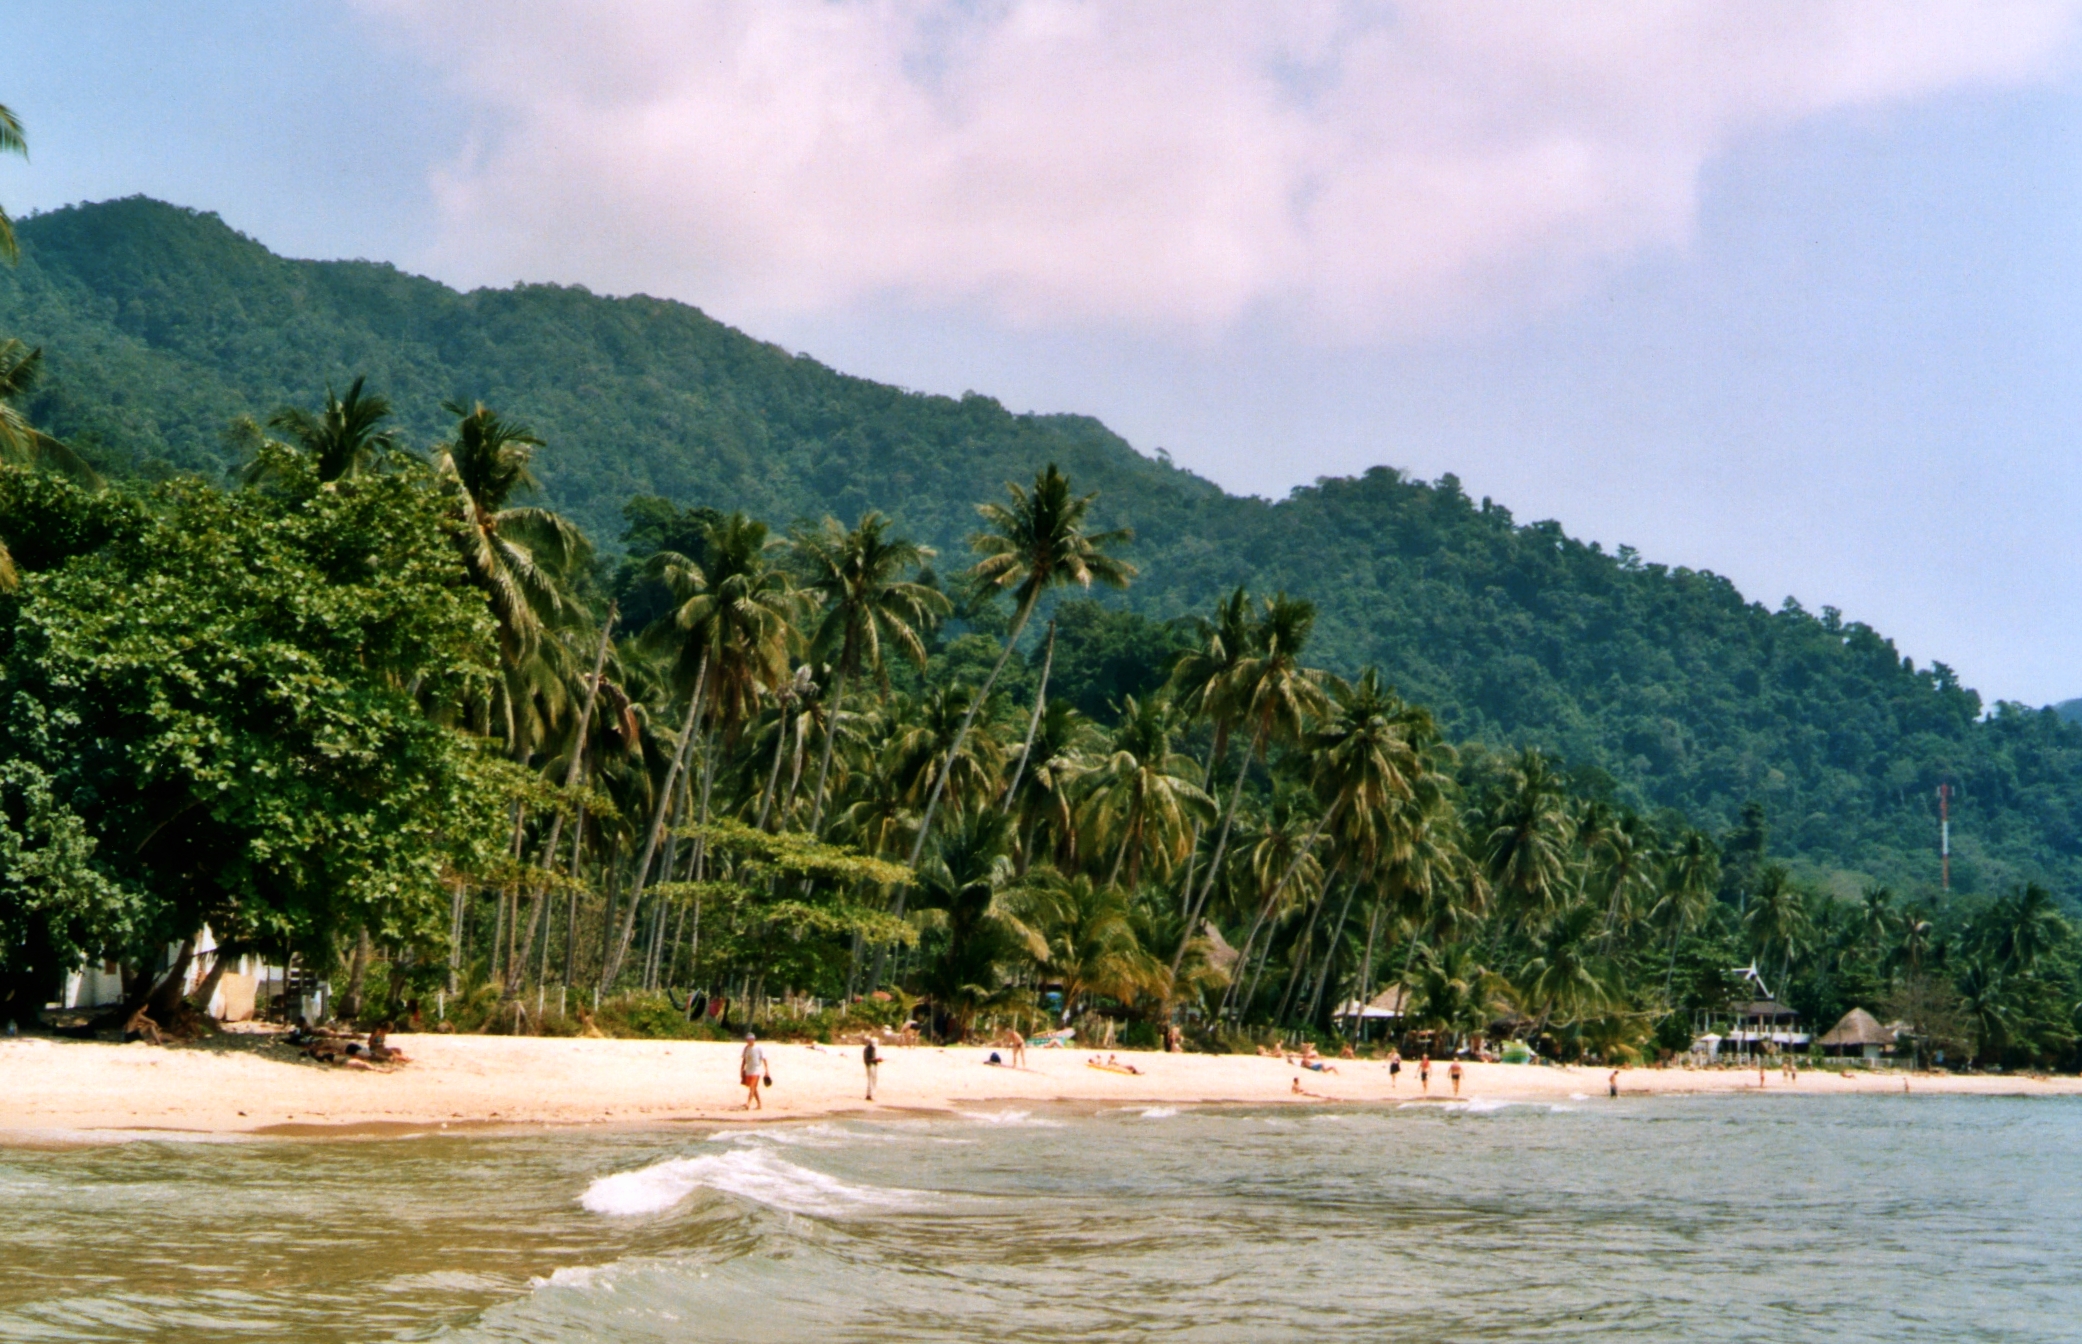 Tropical Lonely Beach, surrounded by palm trees in Koh Chang's west coast, Thailand